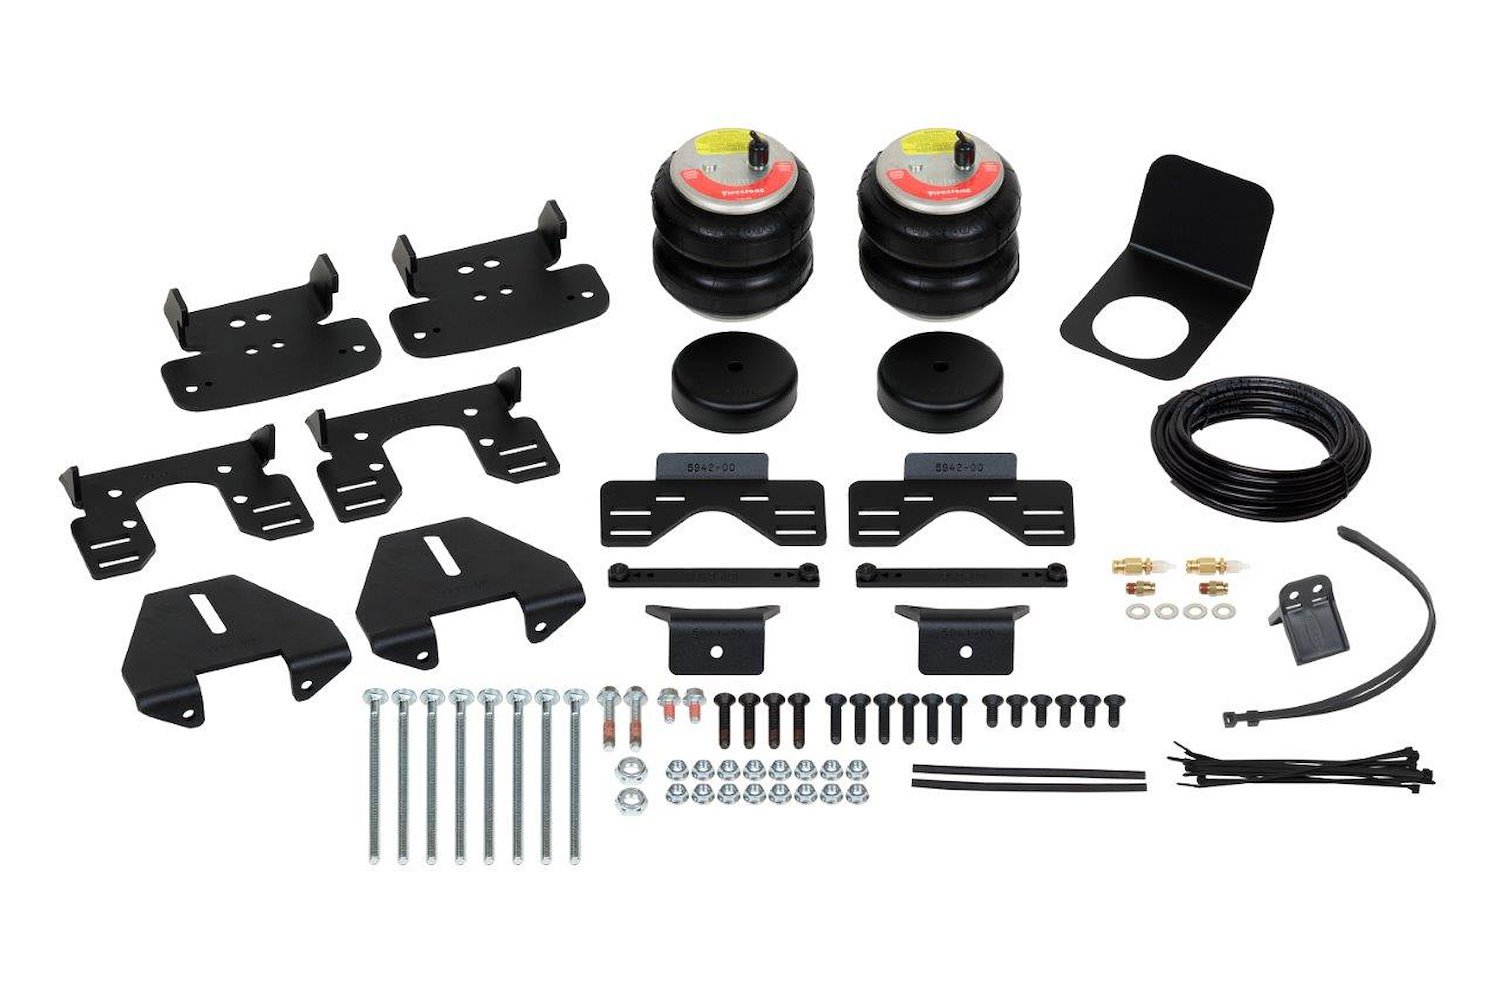 2716 Ride-Rite Air Spring Kit Fits Select Ford